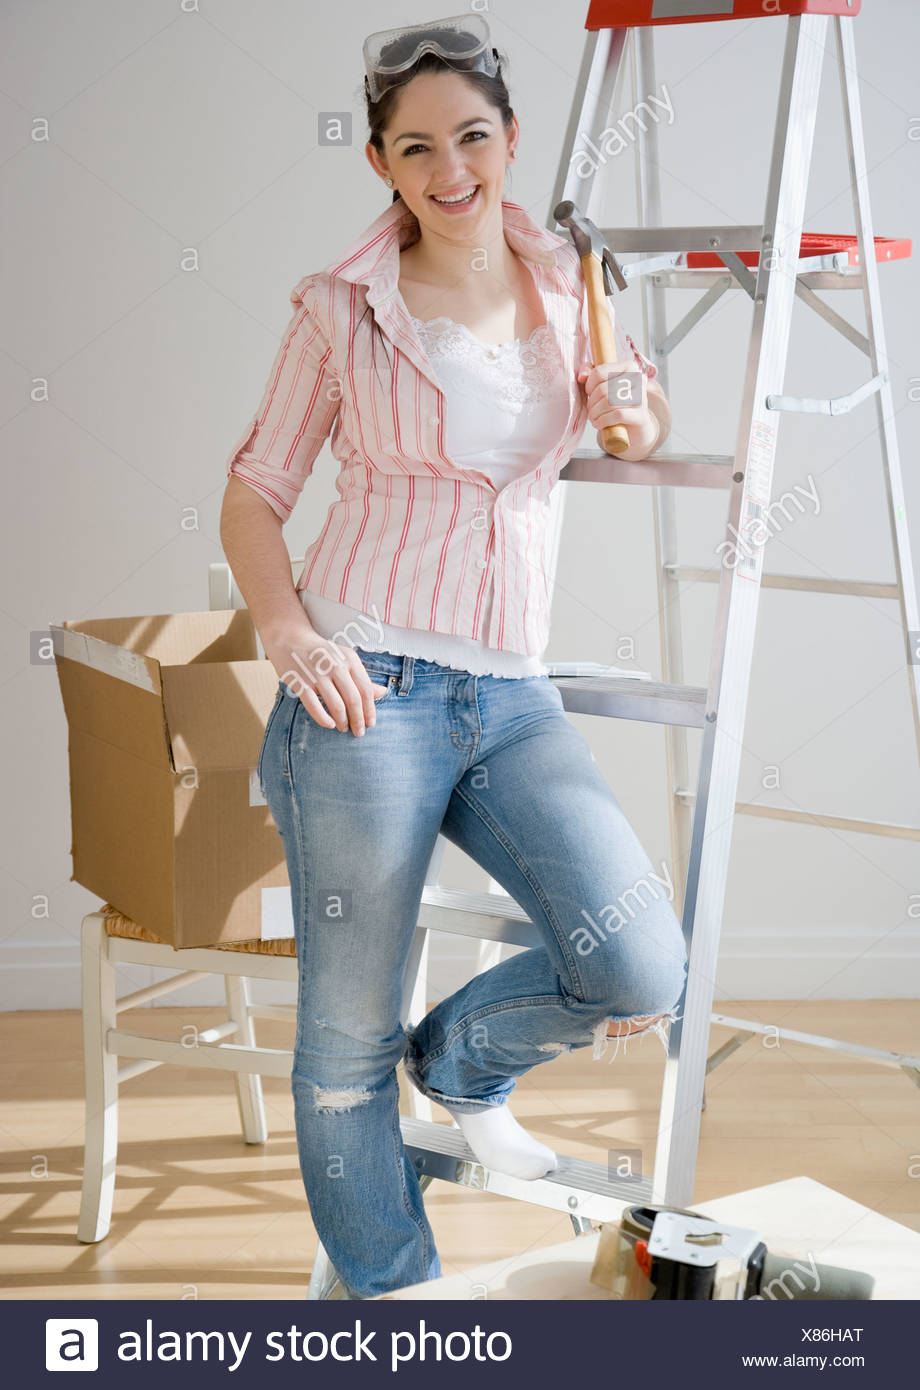 Woman holding hammer next to ladder Stock Photo: 280428480 - Alamy